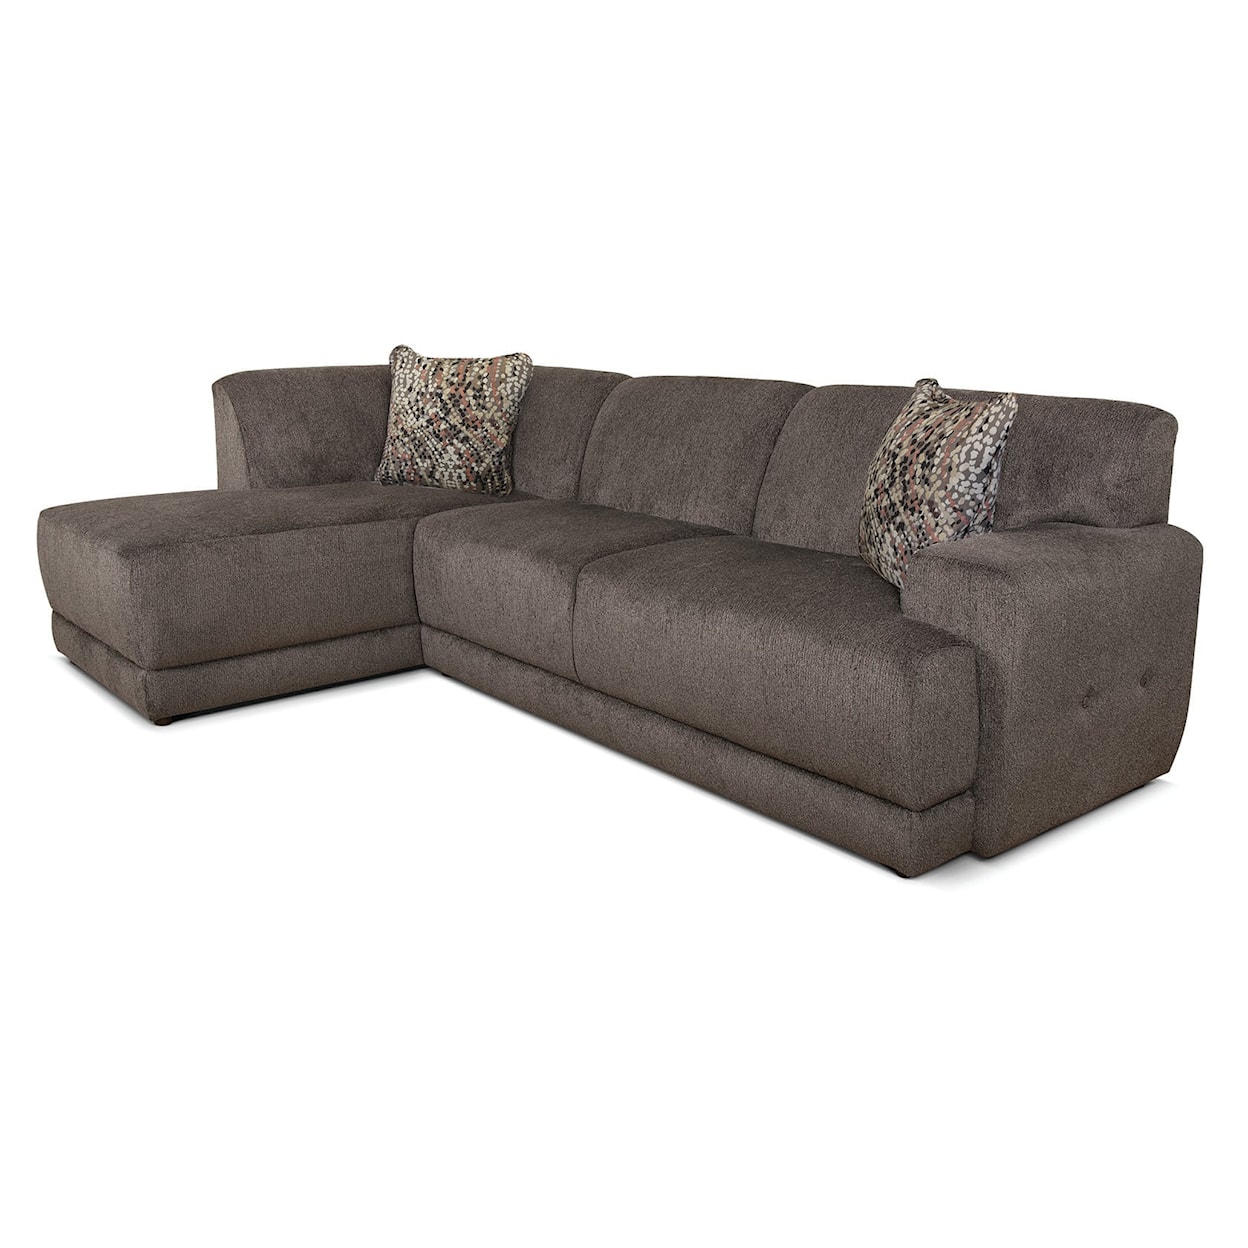 Tennessee Custom Upholstery 2880 Series Sectional Sofa with Left Facing Chaise